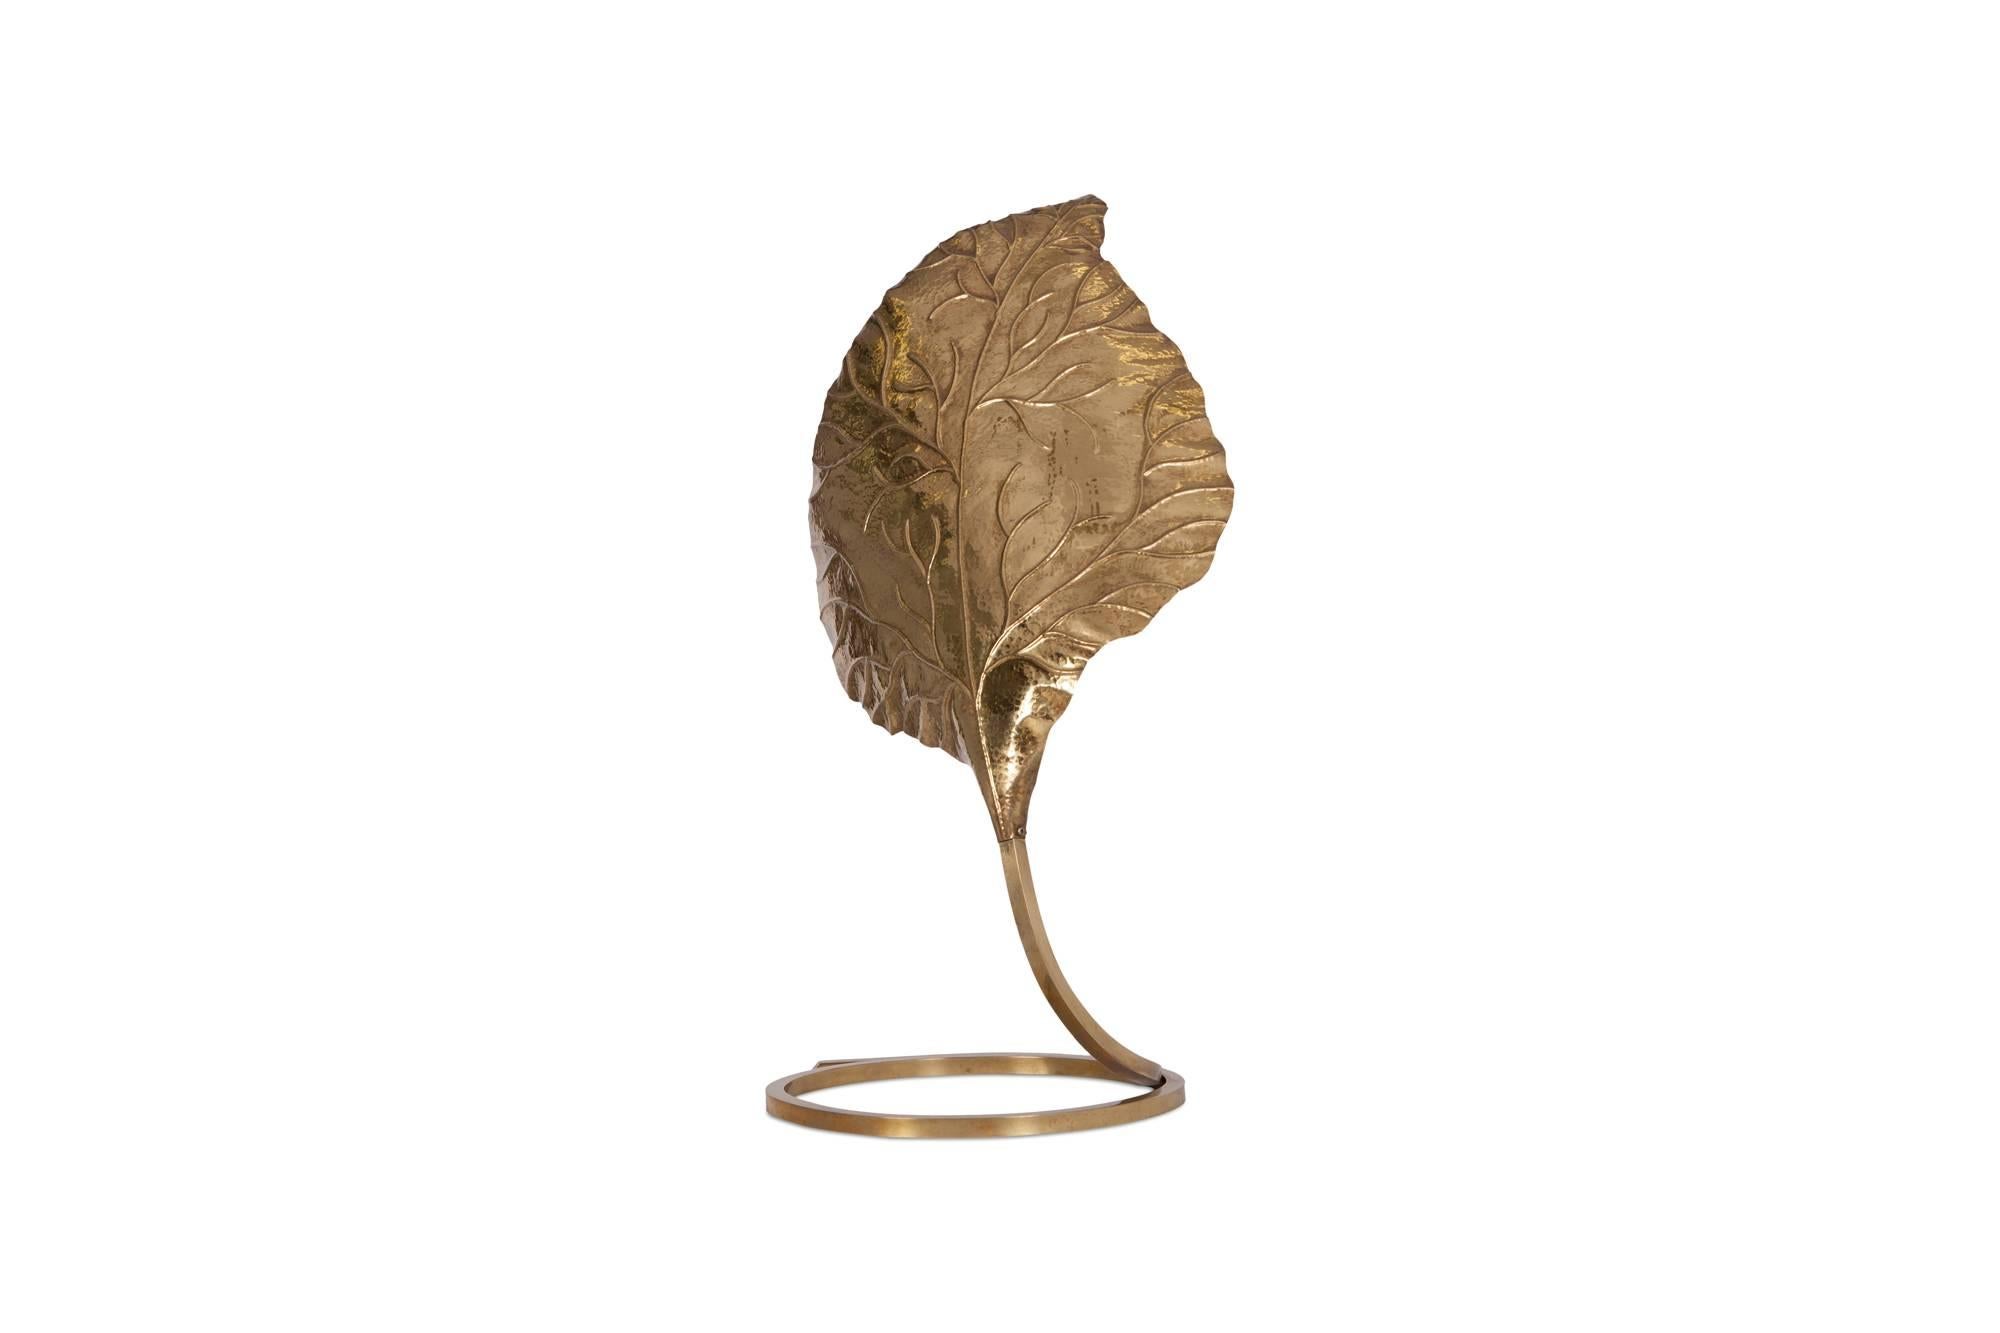 Mid-century modern Brass “Rabarbaro” table lamp by Carlo Giorgi for Bottega Gadda, Italy, 1970s. 
The Rhubarb shaped leaf is completely hammered by hand, showing great skill of craftsmanship which Carlo Giorgi was well known for. The handcrafted